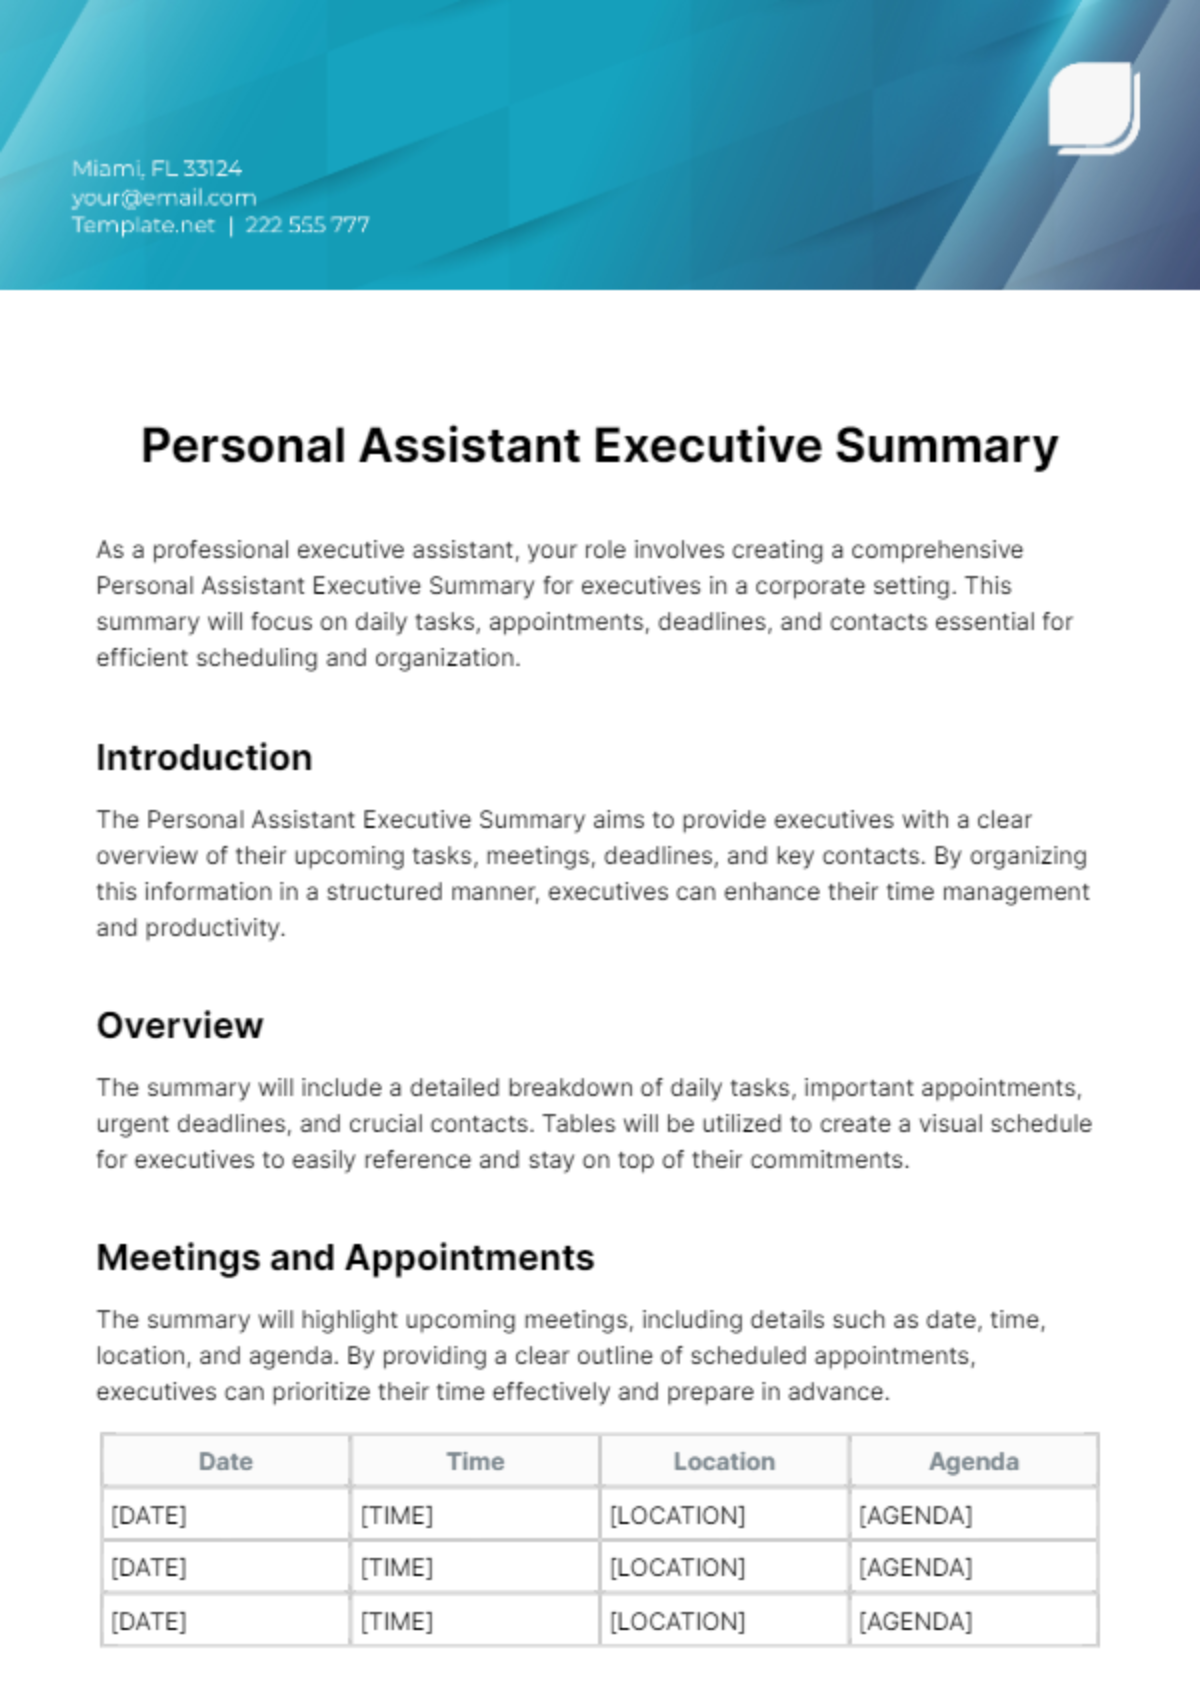 Personal Assistant Executive Summary Template